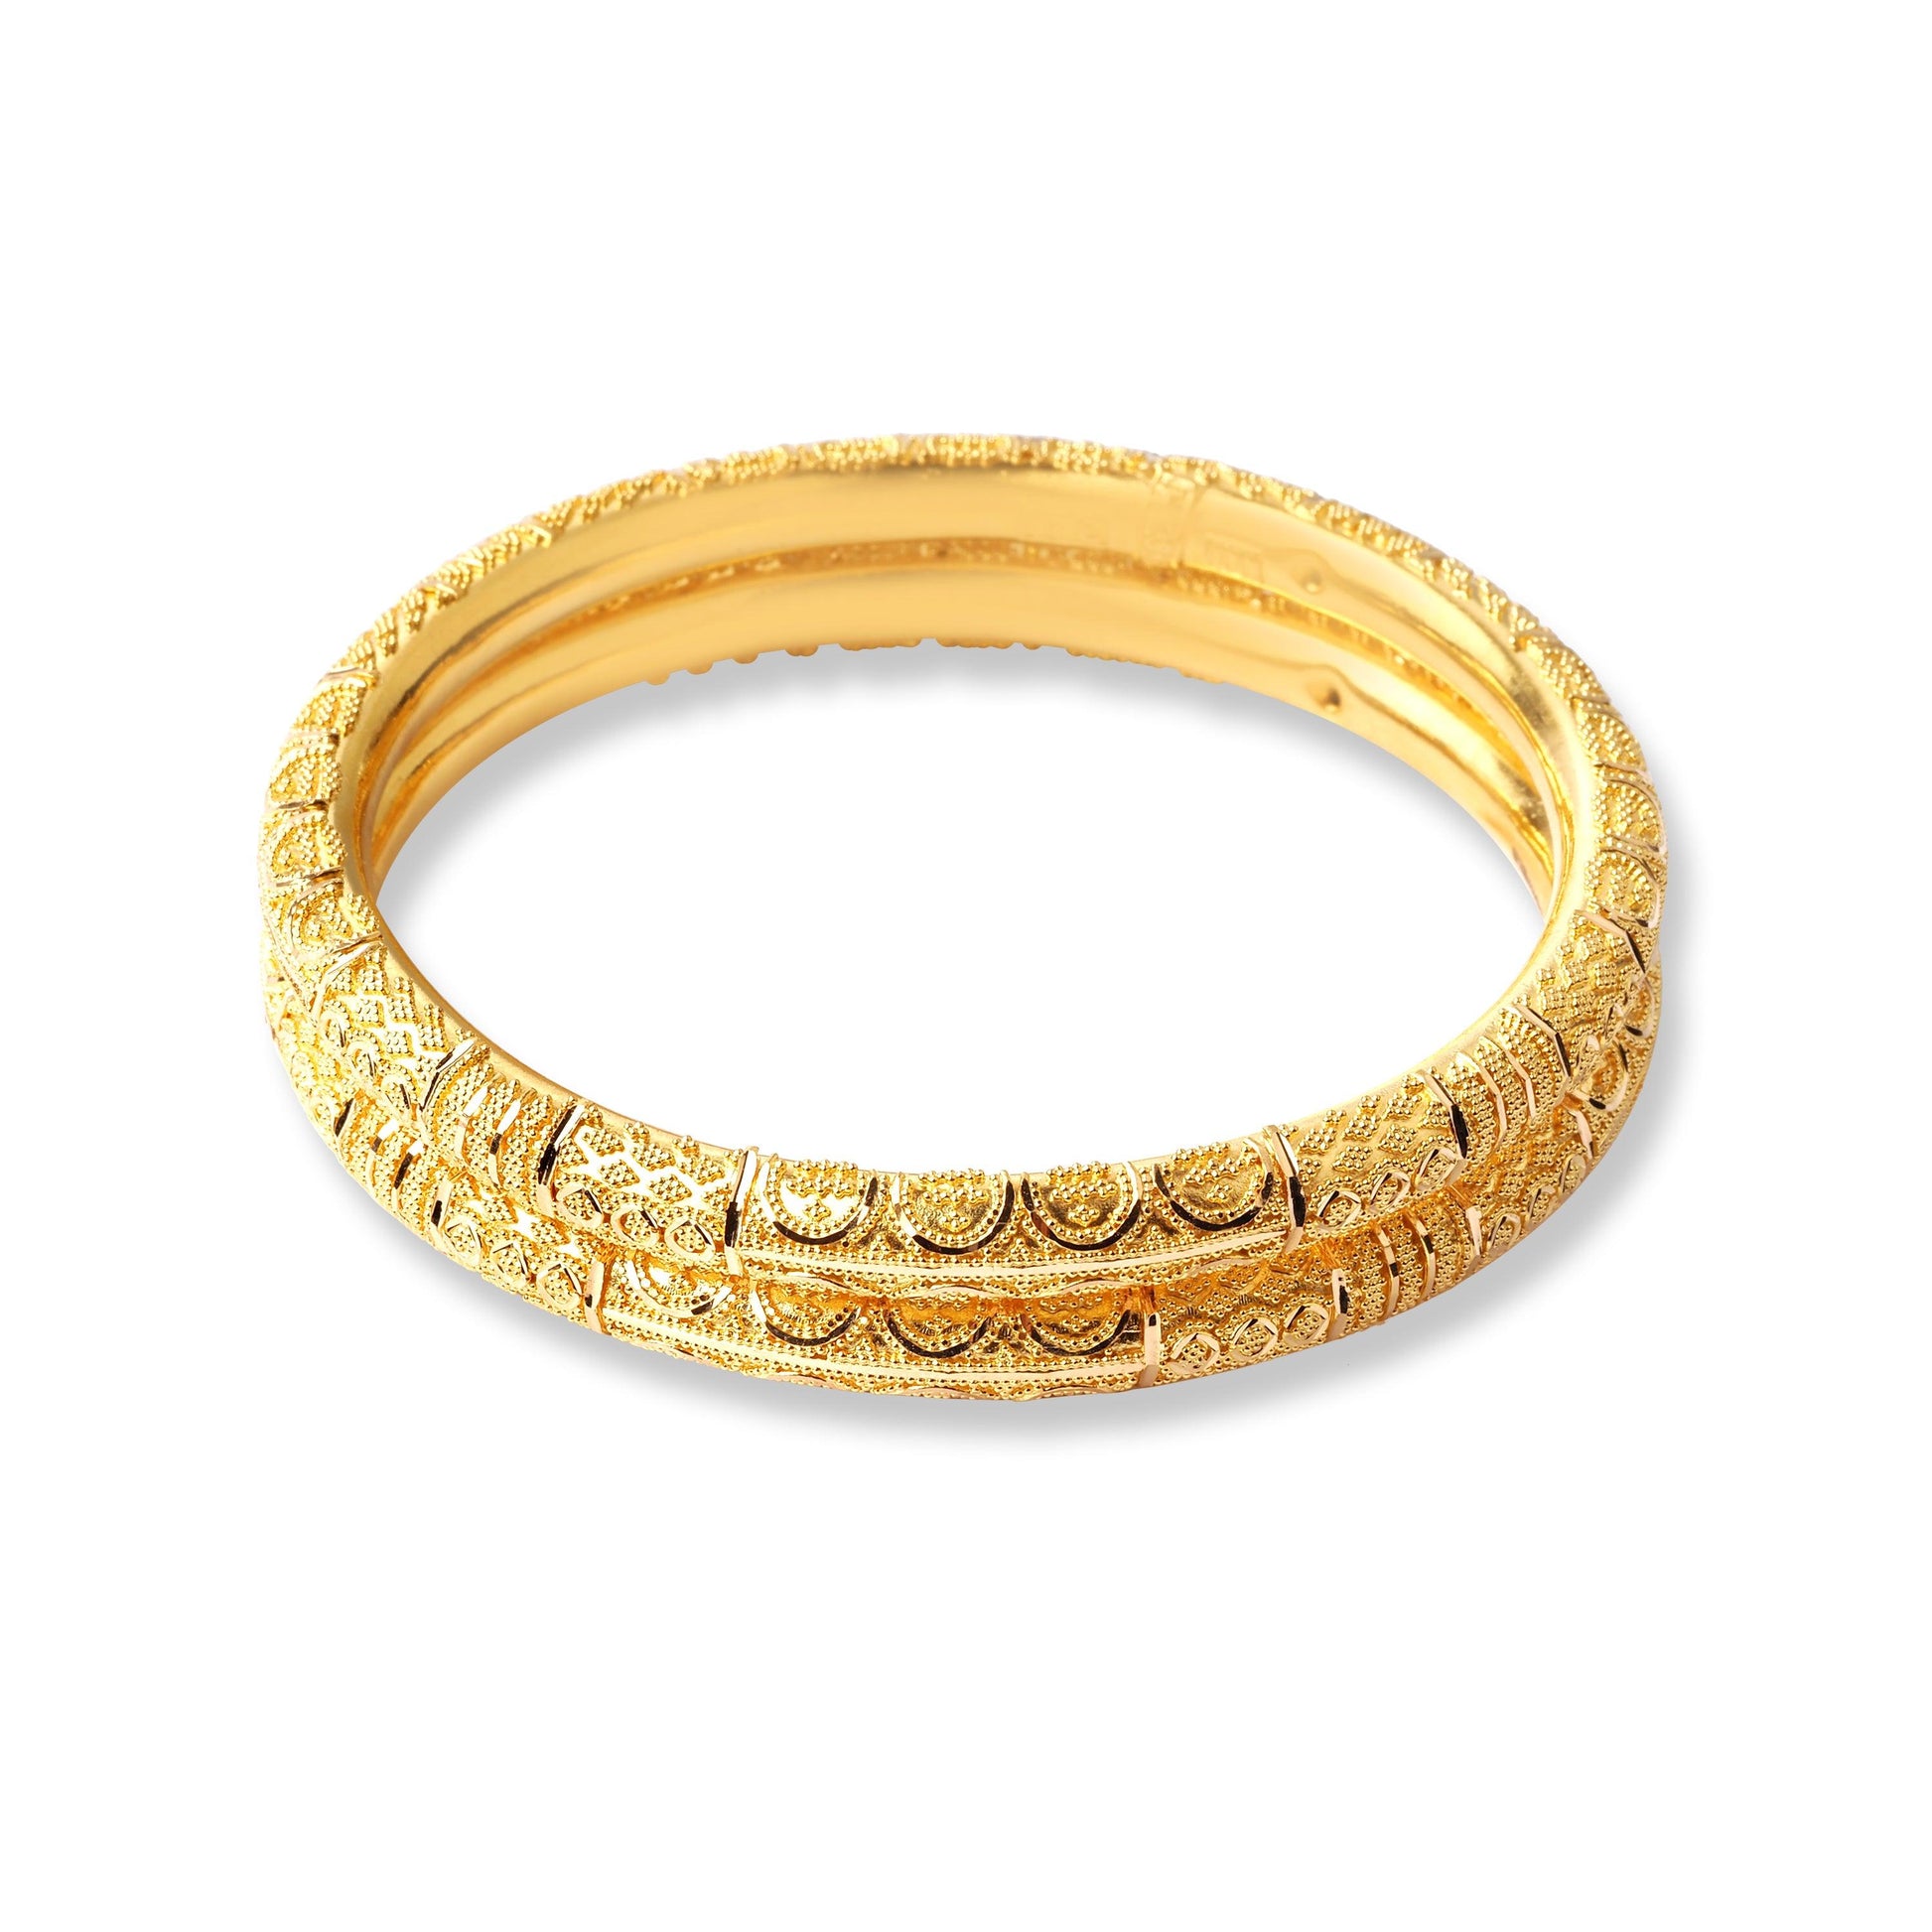 22ct Gold Pair of Hollow Tube Bangles with Filigree Work & Comfort fit Finish B-8513 - Minar Jewellers